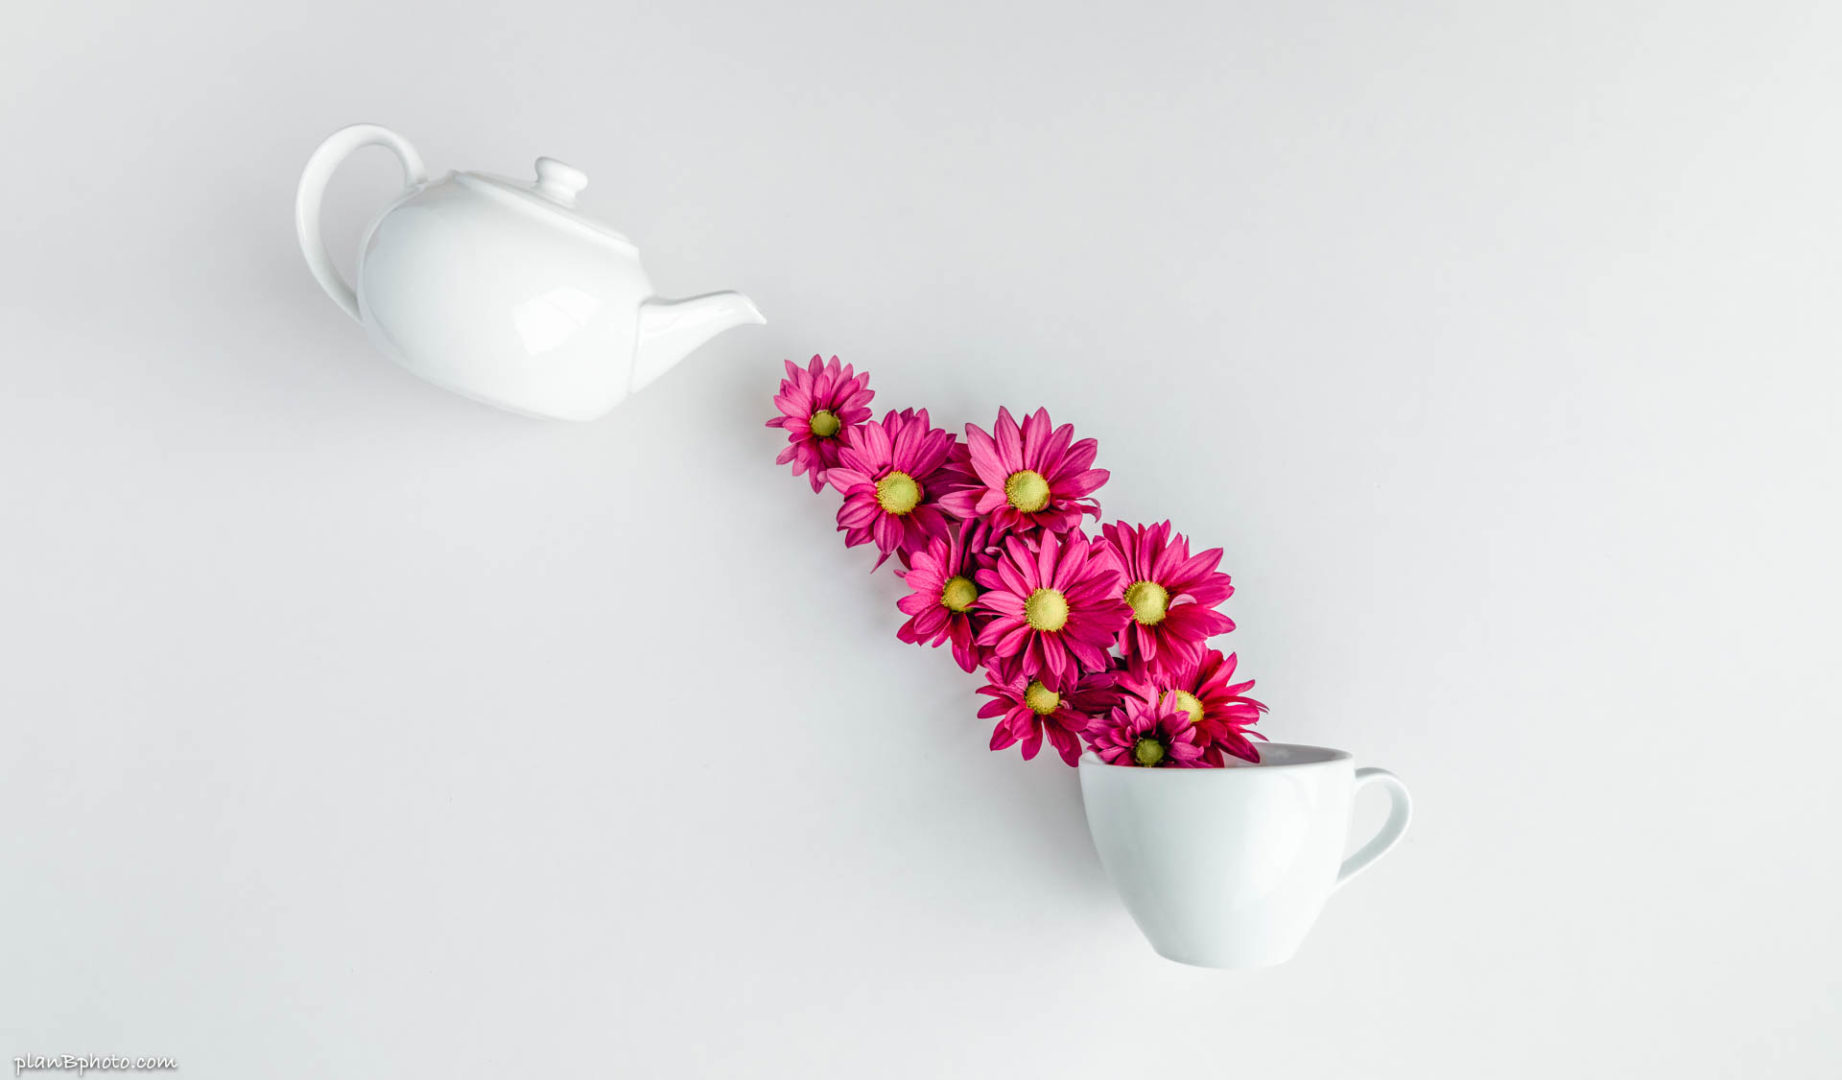 Pouring daisy-like flowers in a tea cup flat lay image